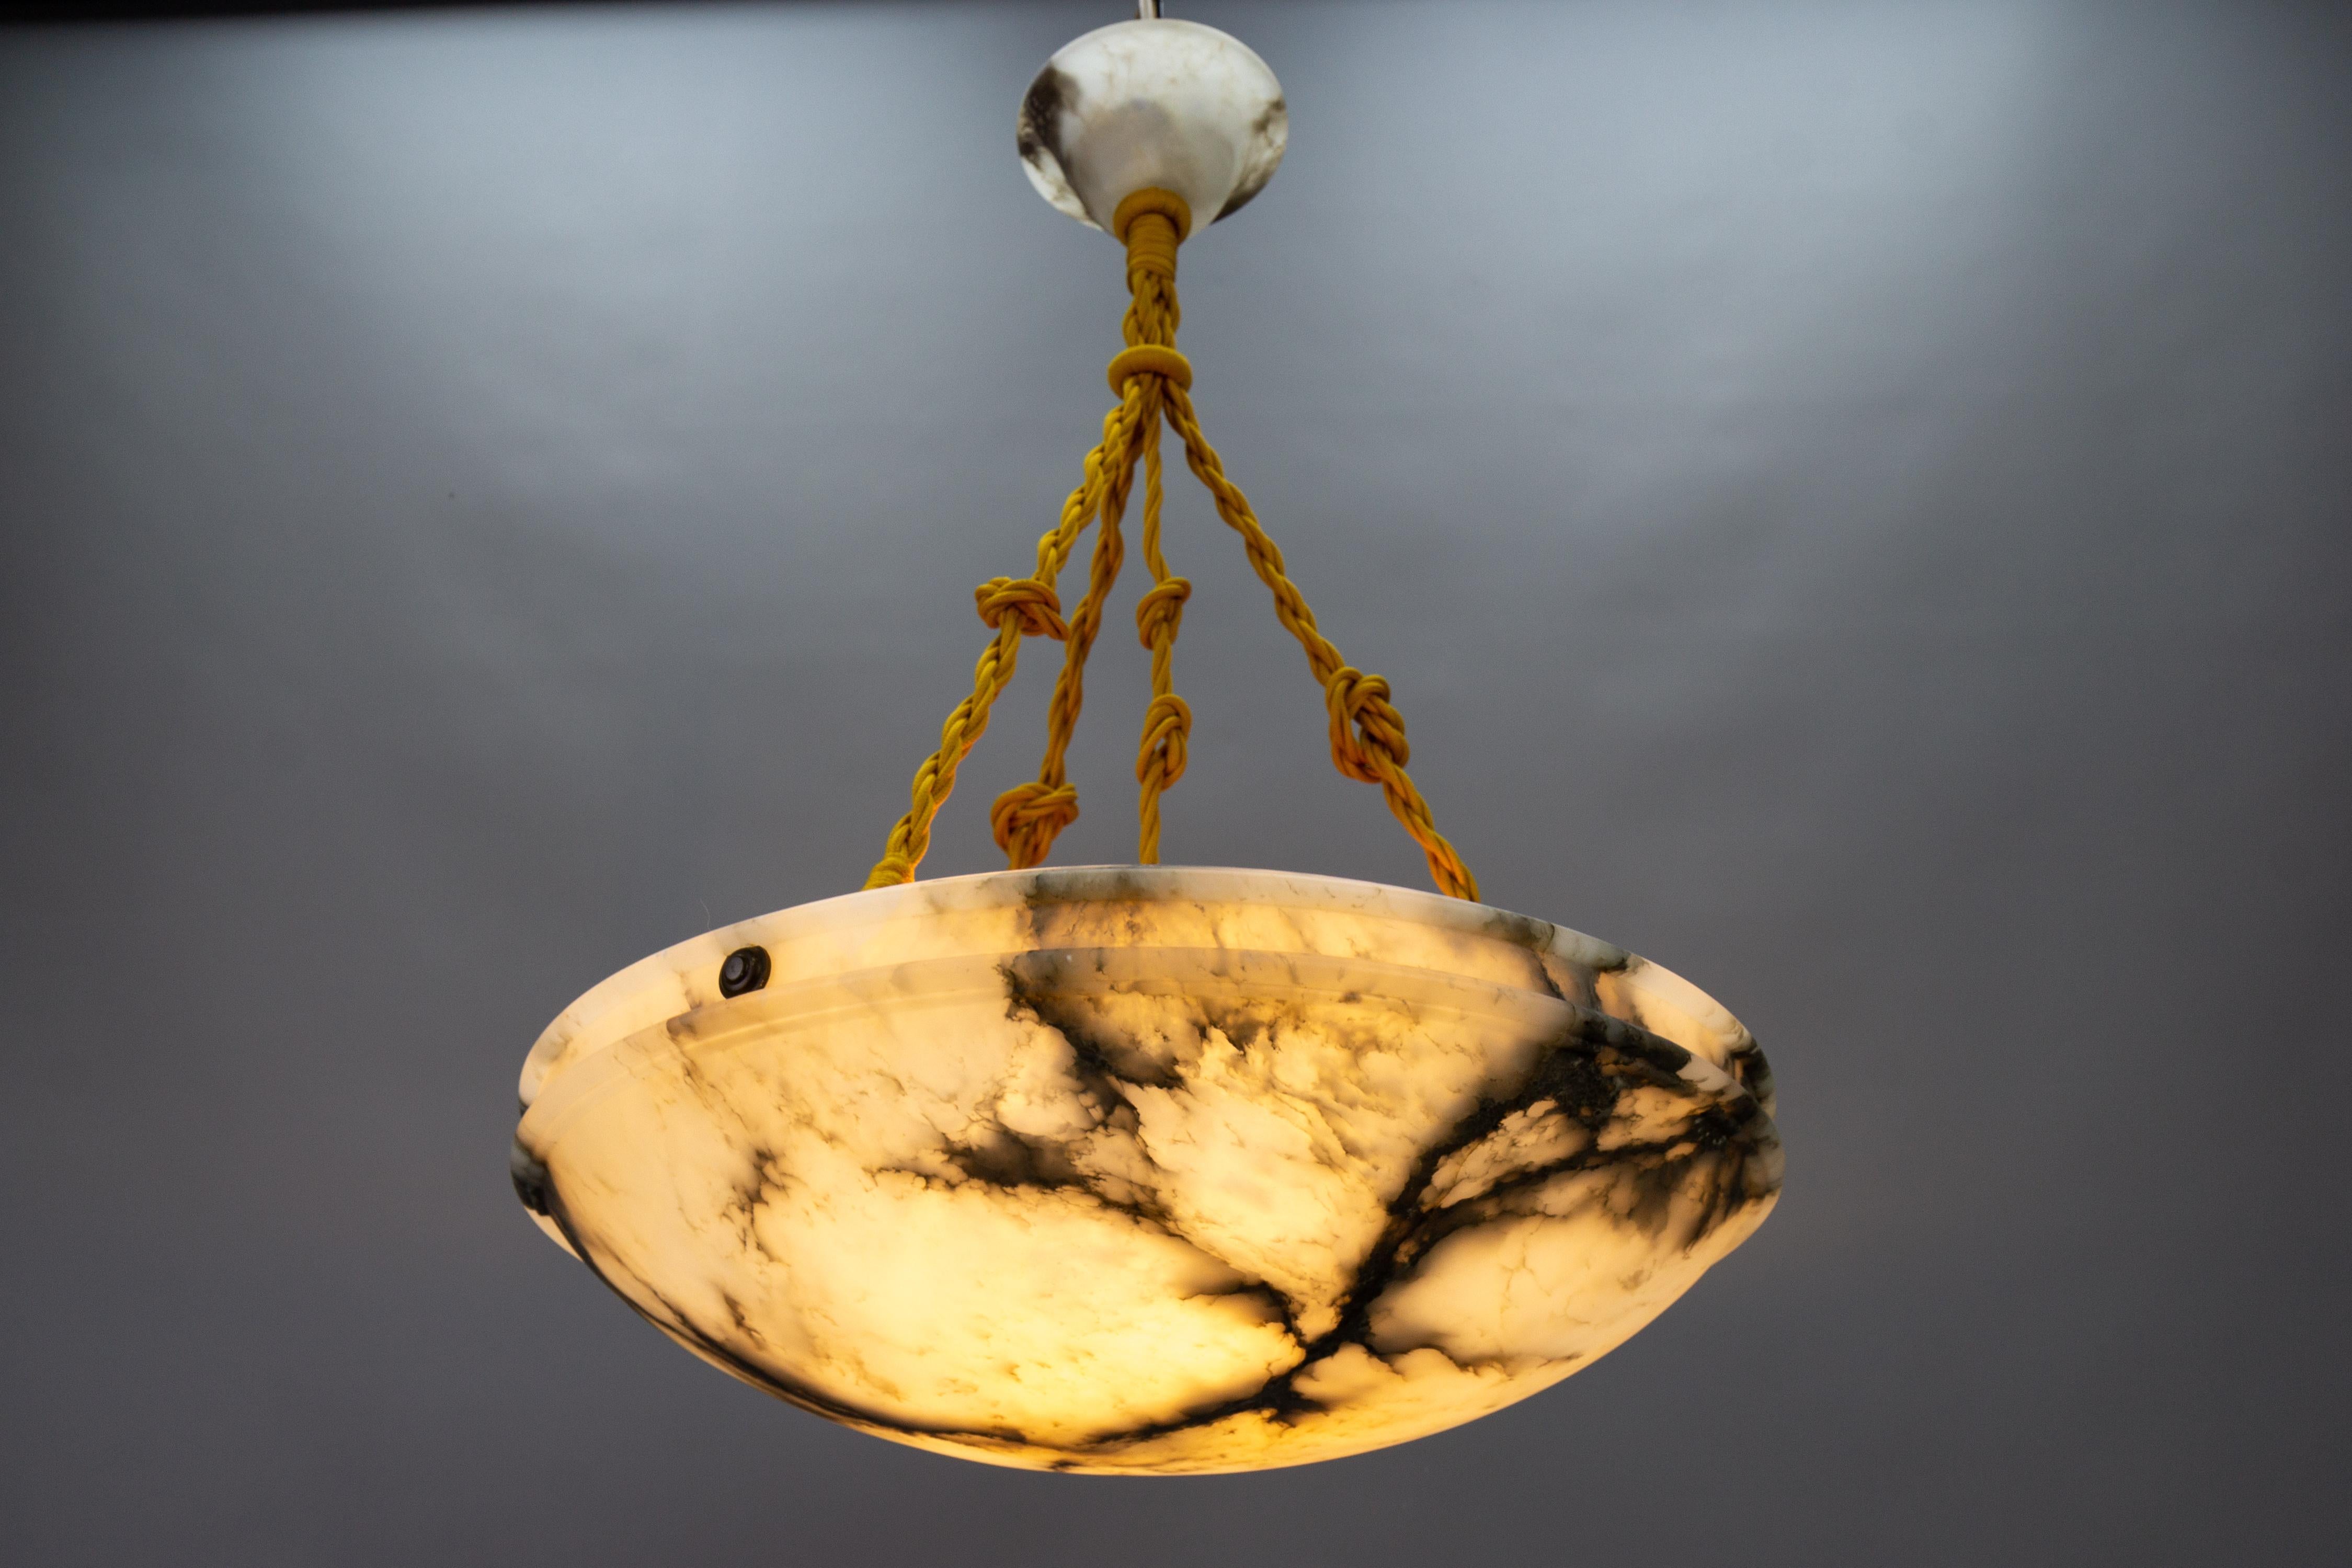 An elegant, round Art Nouveau period ceiling pendant light featuring a lampshade - a bowl - of white alabaster with impressive black and dark brown veins. Germany, around 1920.
In a masterfully carved form, this beautifully veined alabaster bowl is